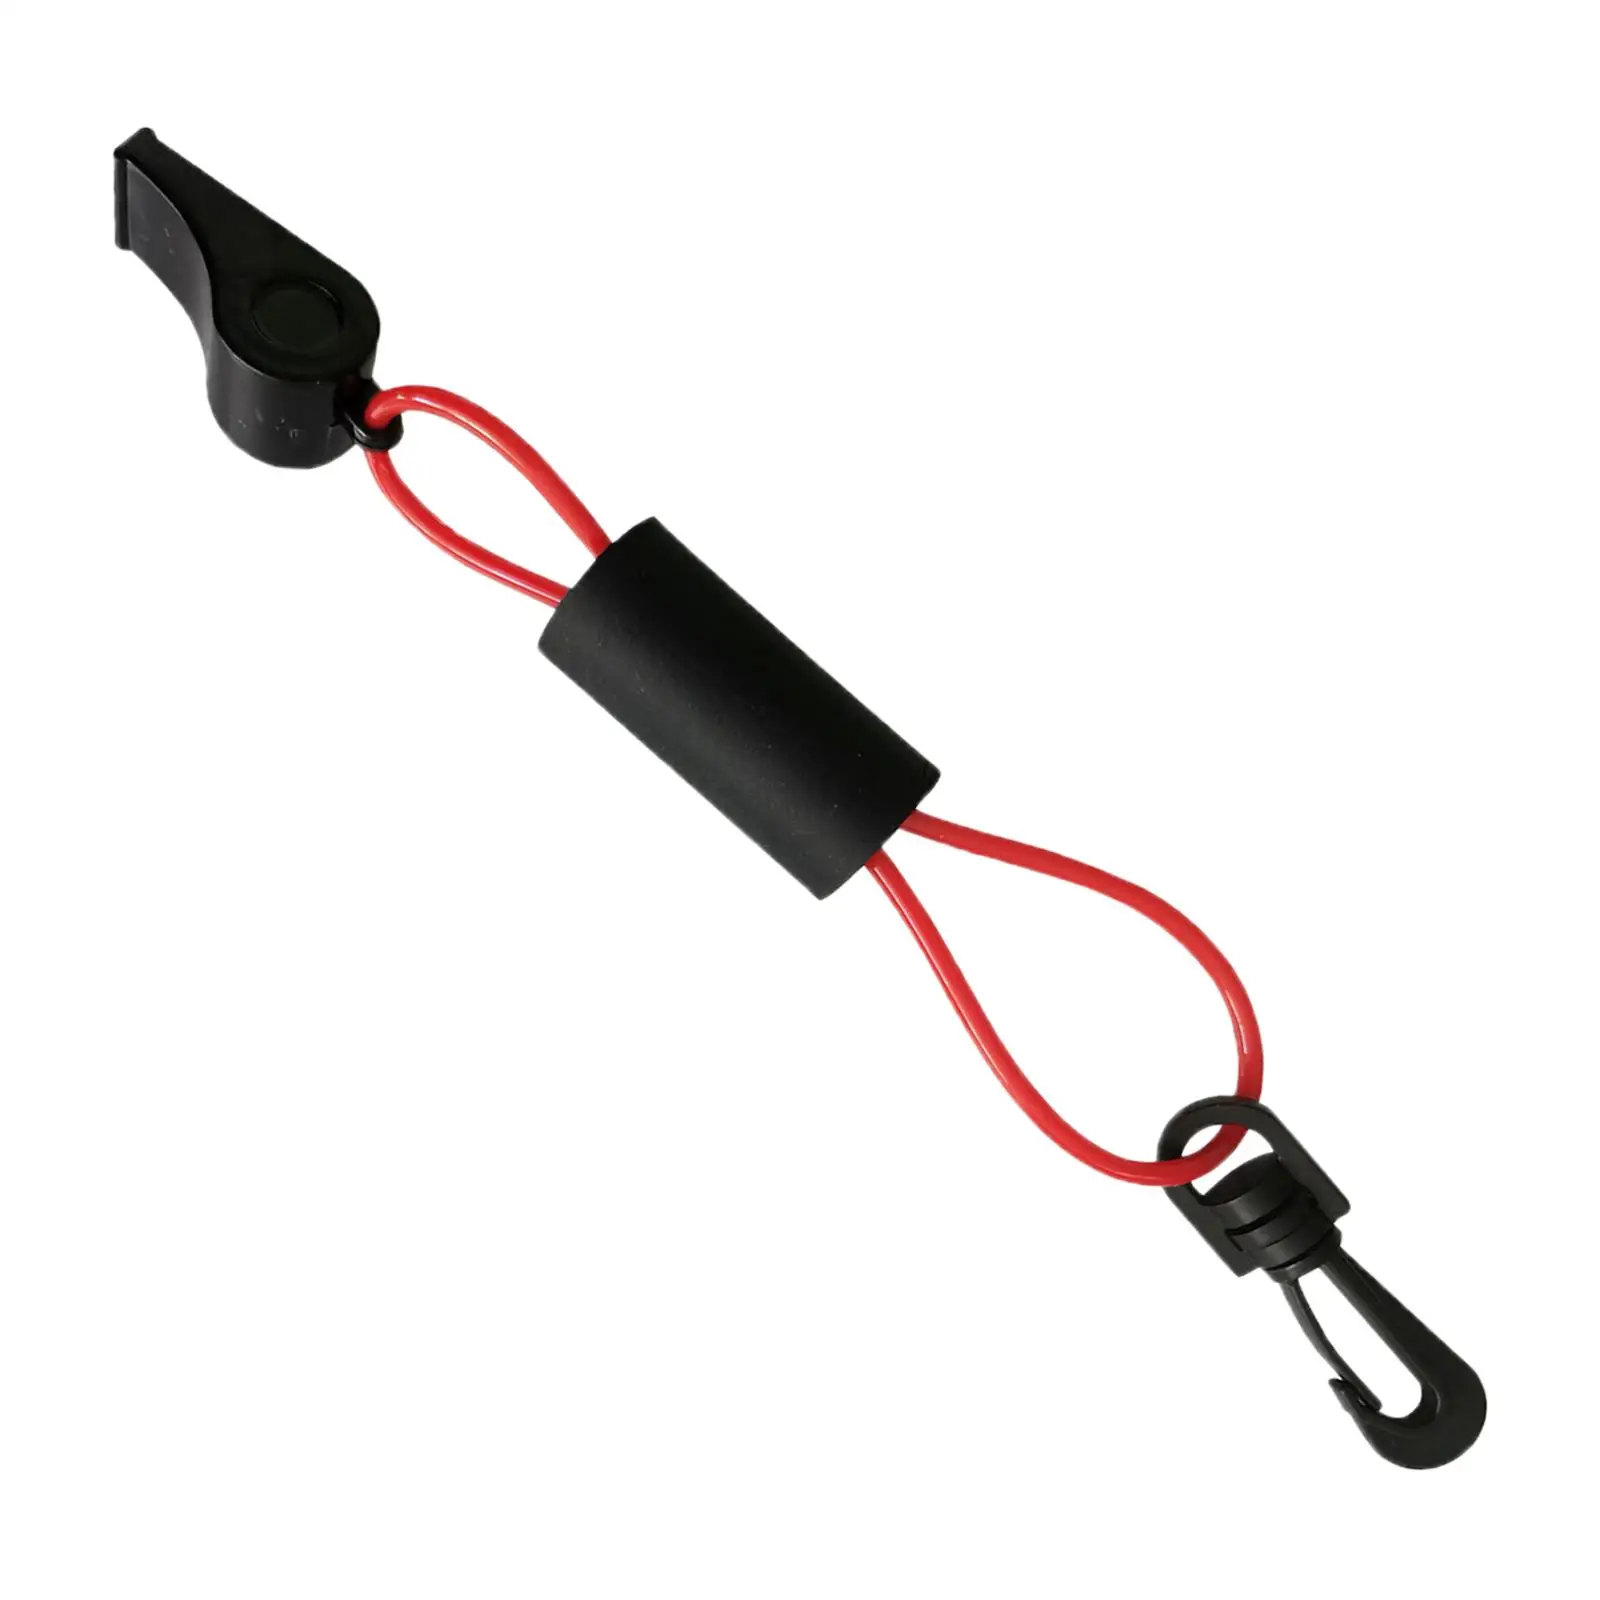 Emergency Safety Kayak Whistle Quick Access Clip Red and Black Color Accessories